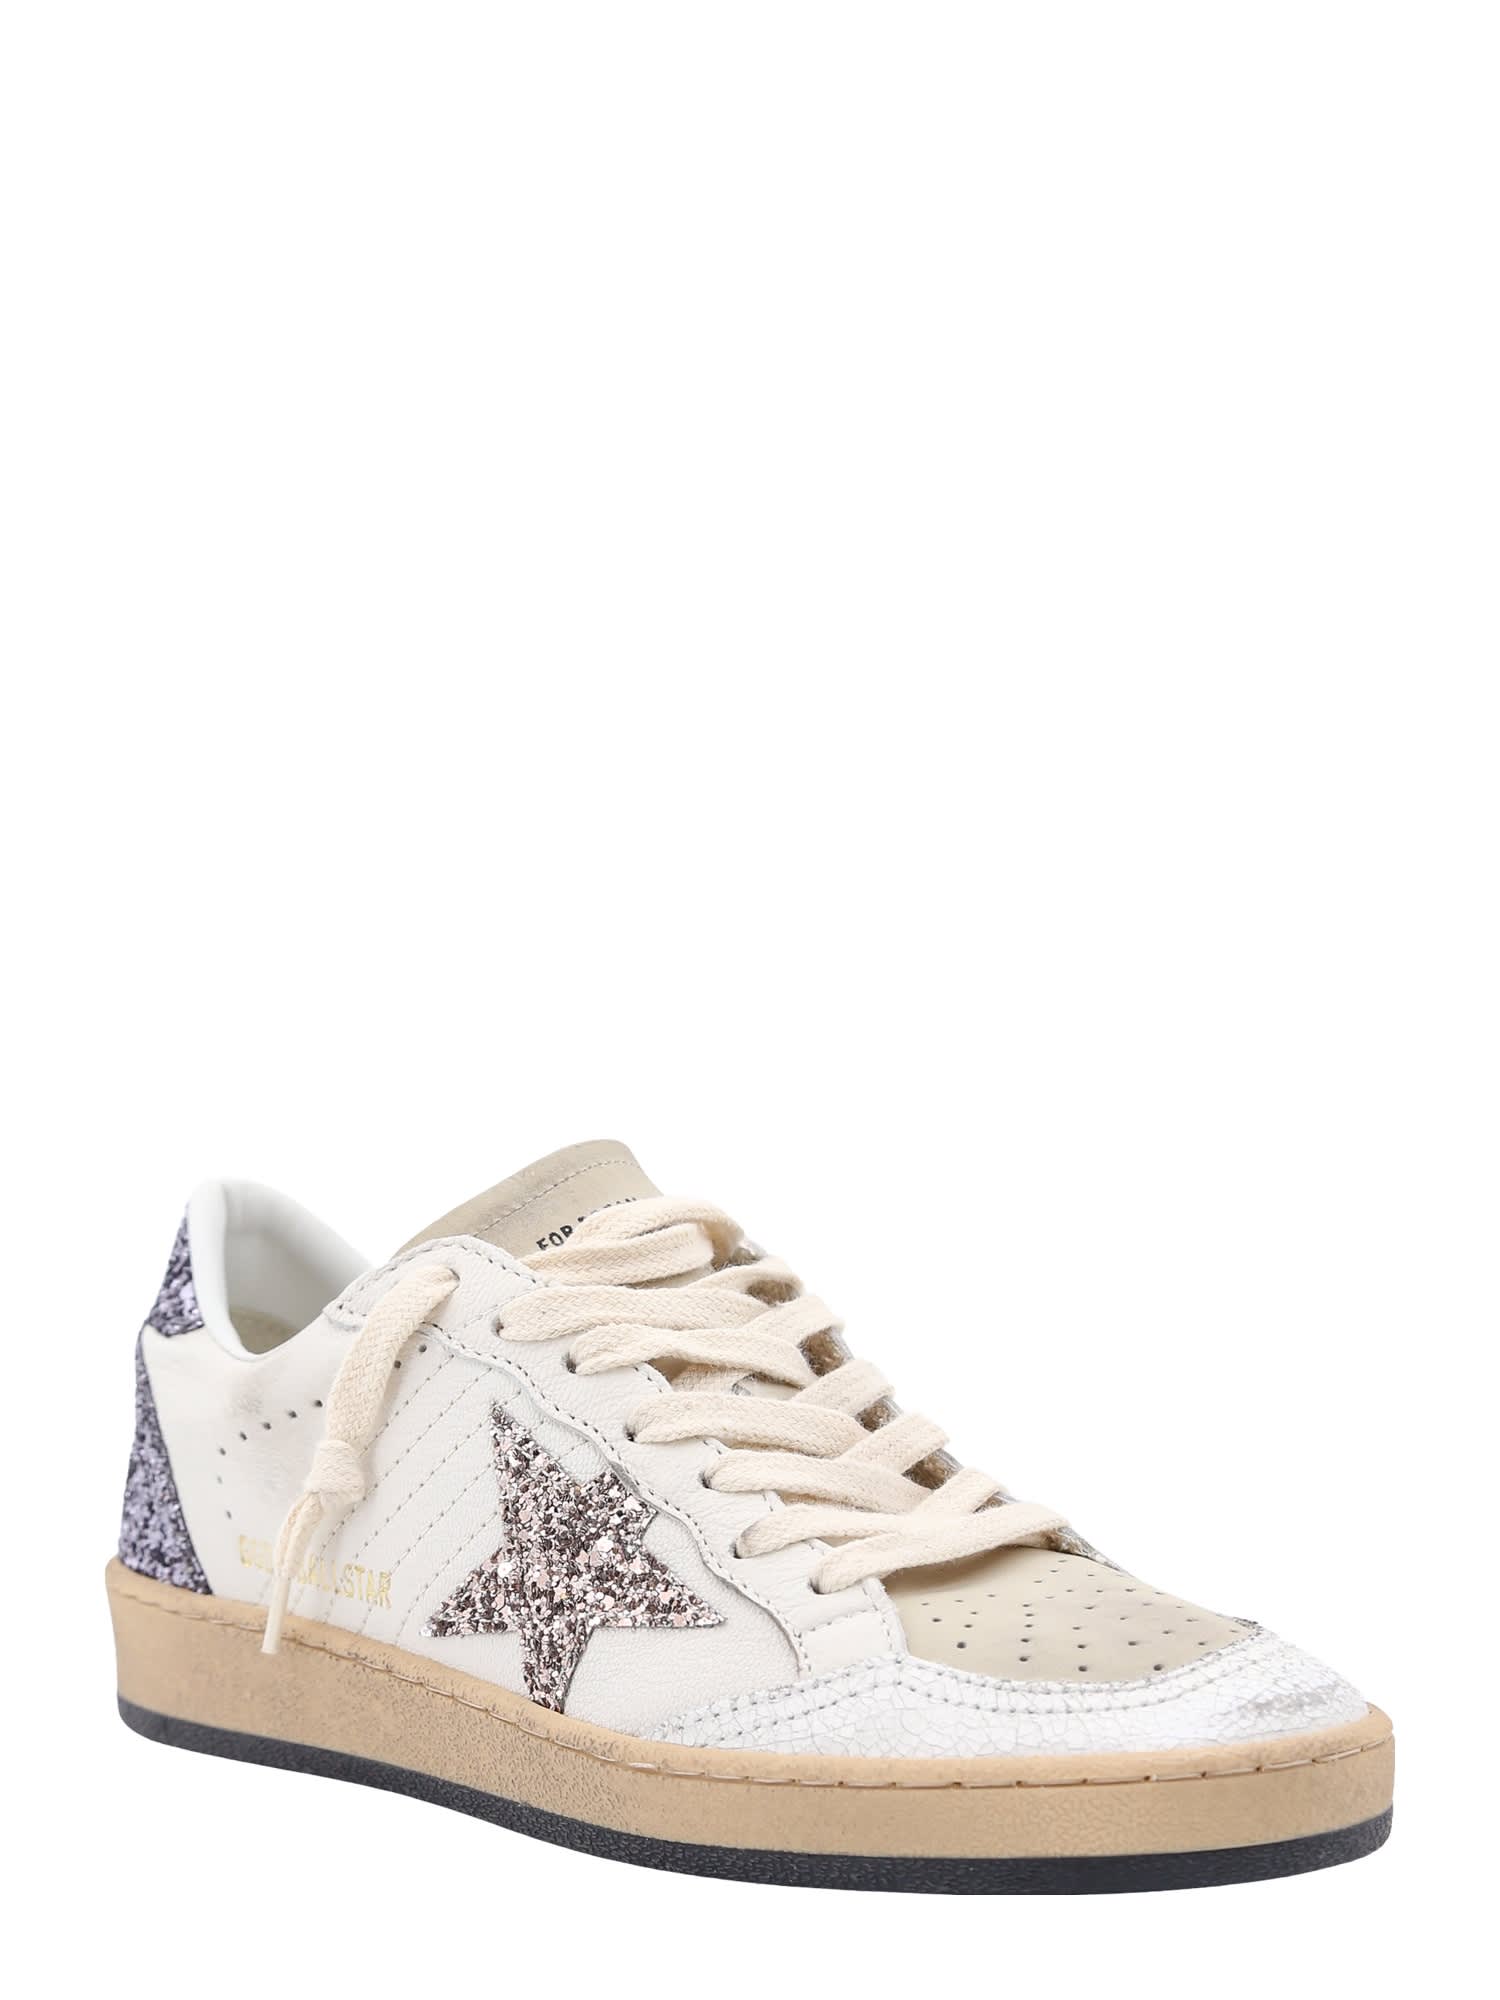 Shop Golden Goose Ball Star Sneakers In White/cinder/antracite